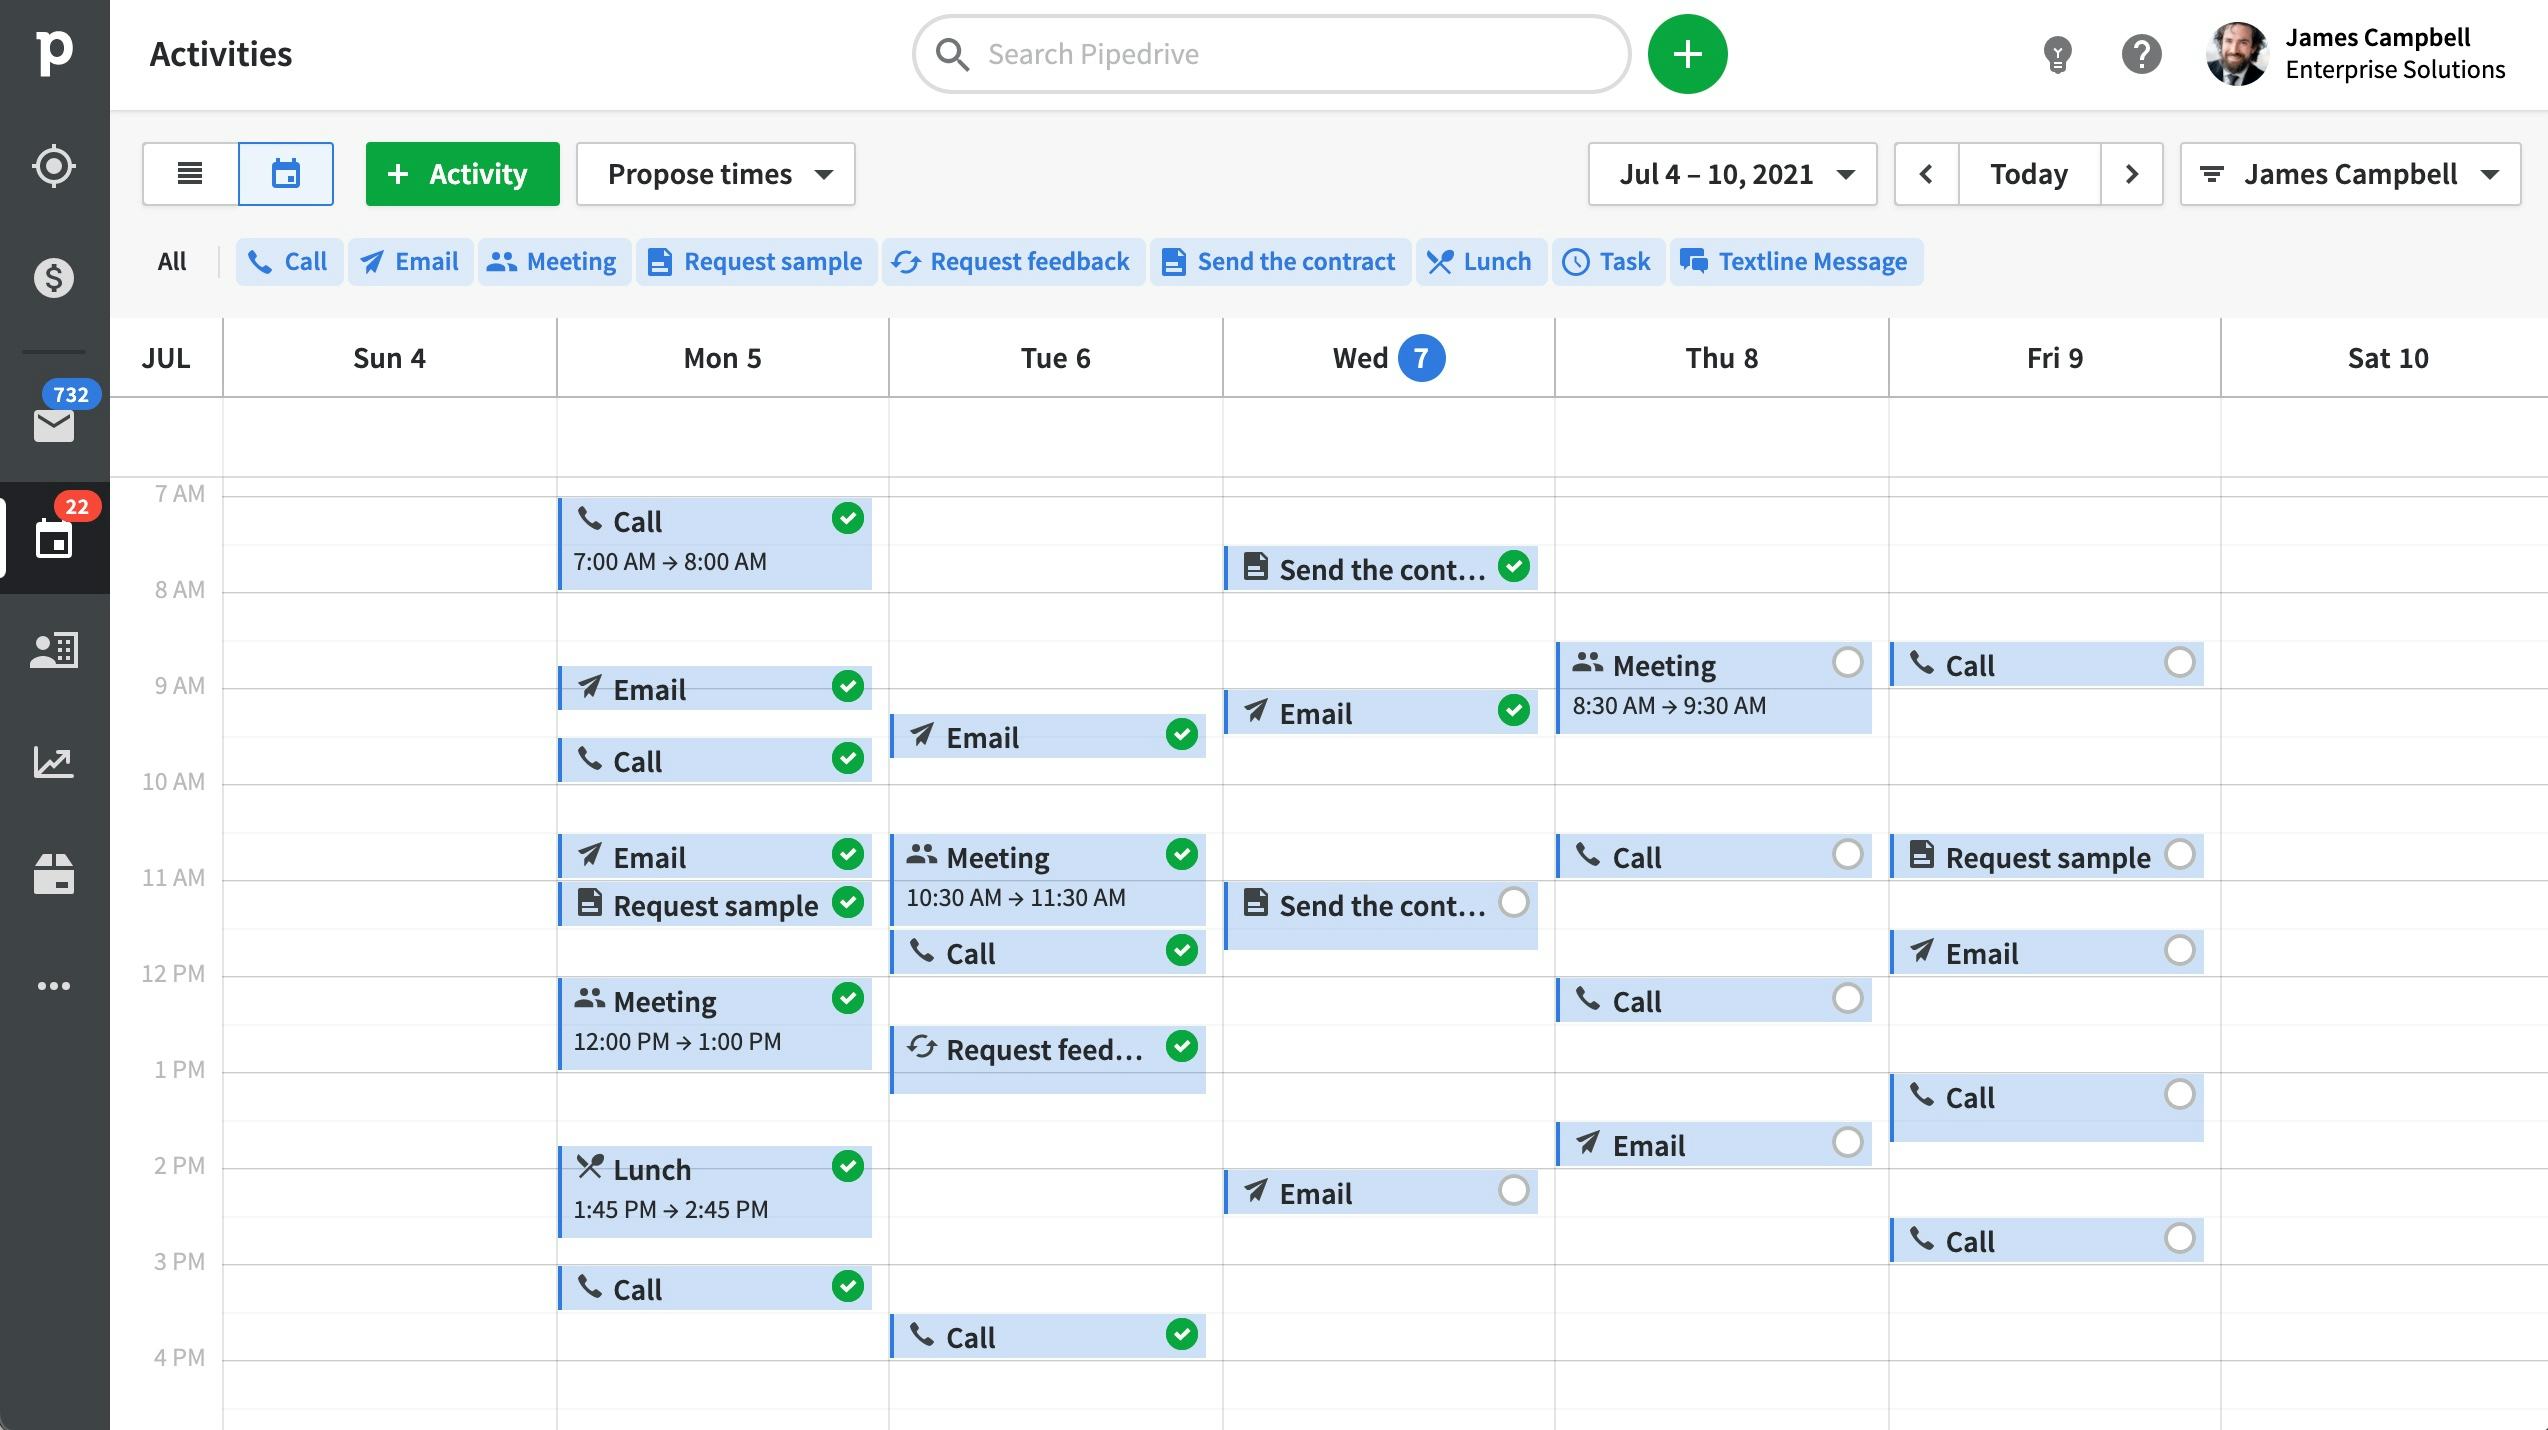 Pipedrive Software - Staying organized and keeping track of your activities is key to keeping your sales moving and making sure you get those all-important wins. To help you manage this, Pipedrive has the calendar view!